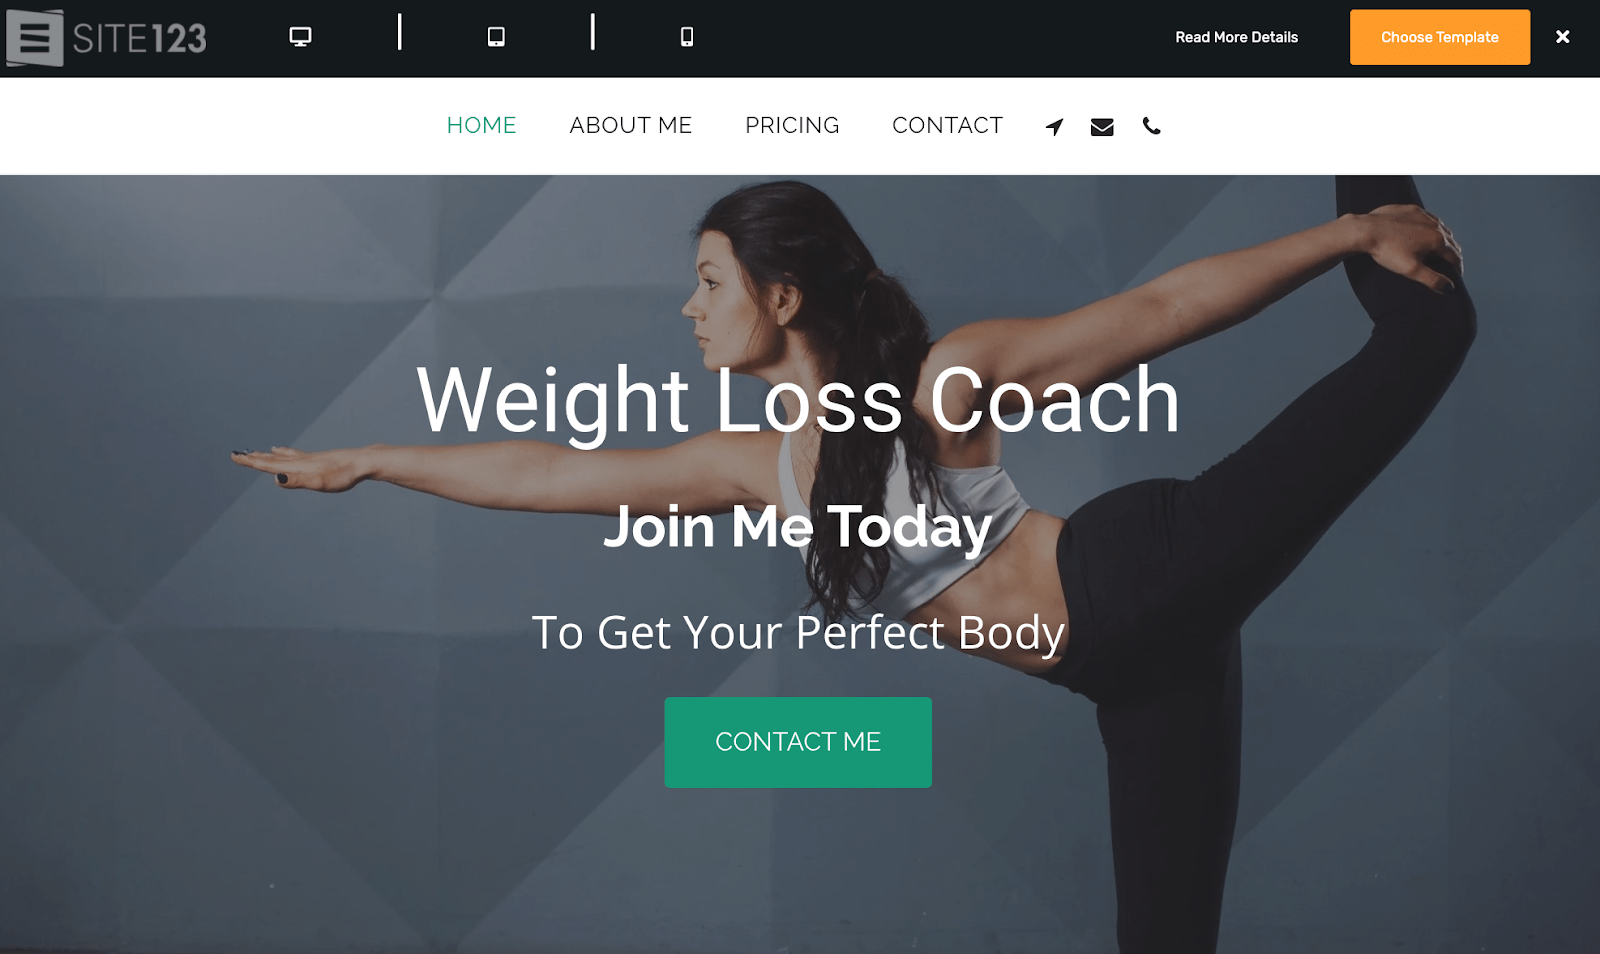 SITE123 Weight Loss Coach template